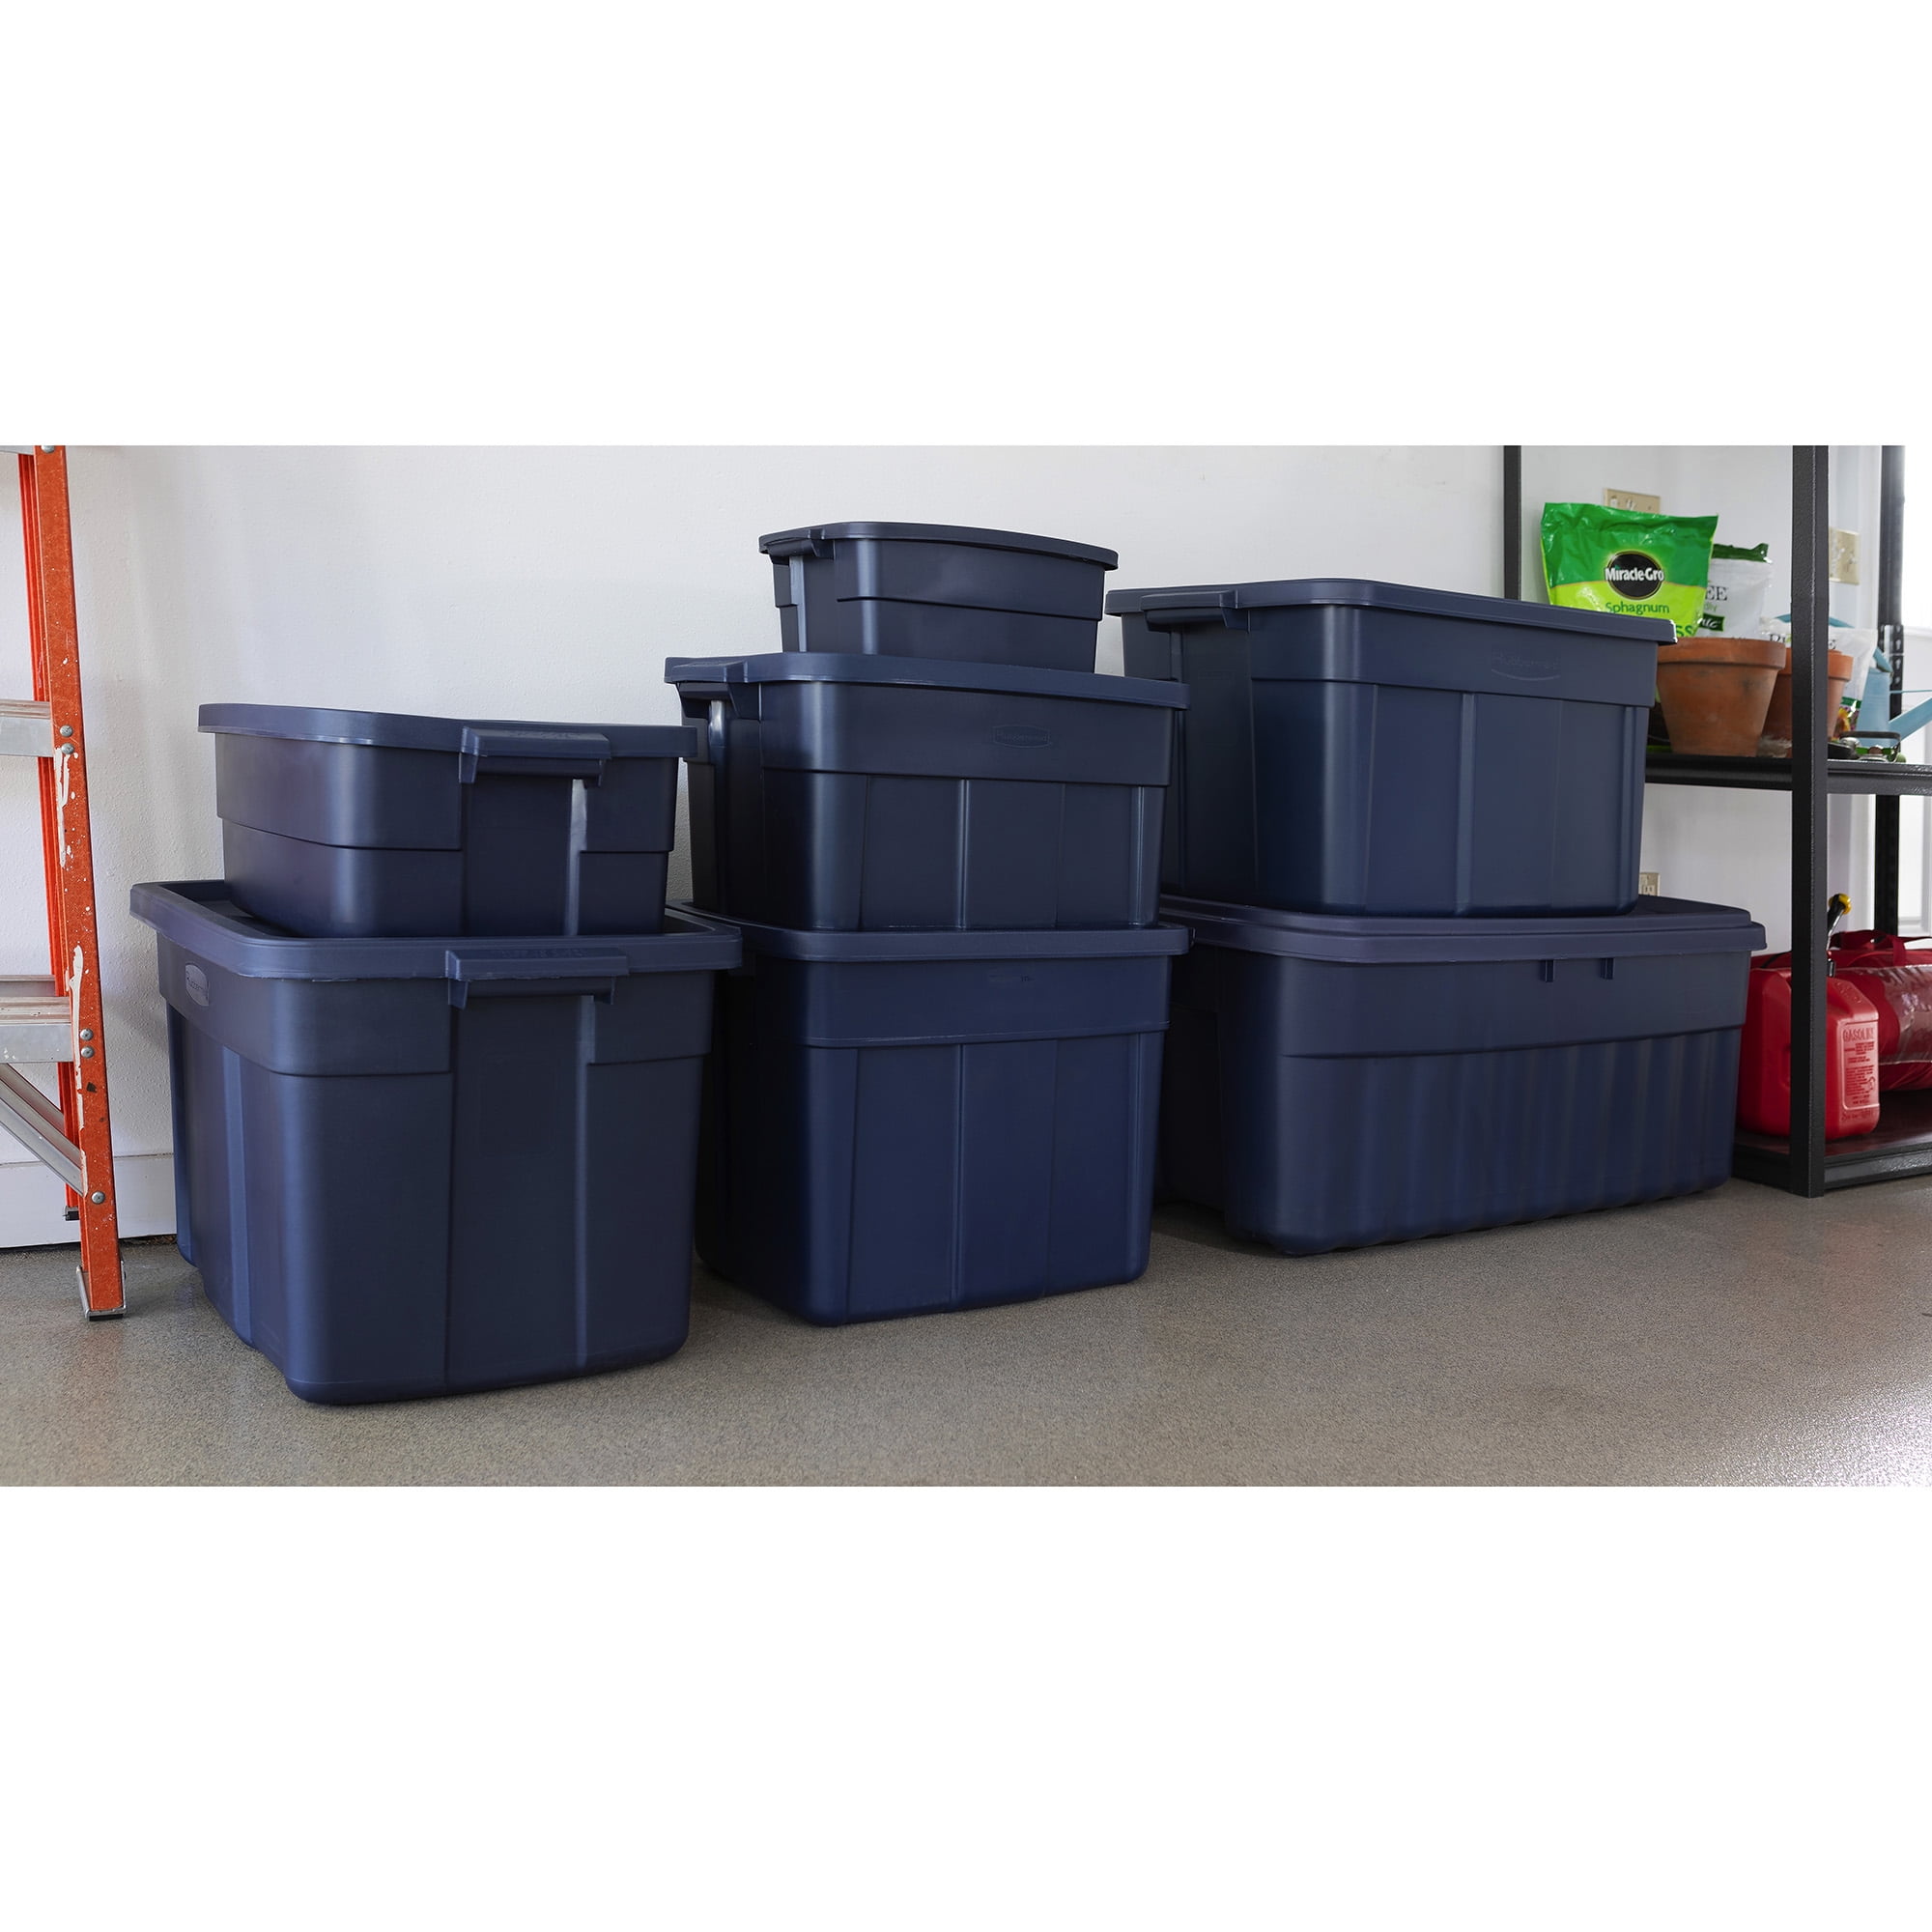 Rubbermaid Roughneck 3 Gal. Rugged Storage Tote Container, Blue (6-Pack)  RMRT030016-6pack - The Home Depot